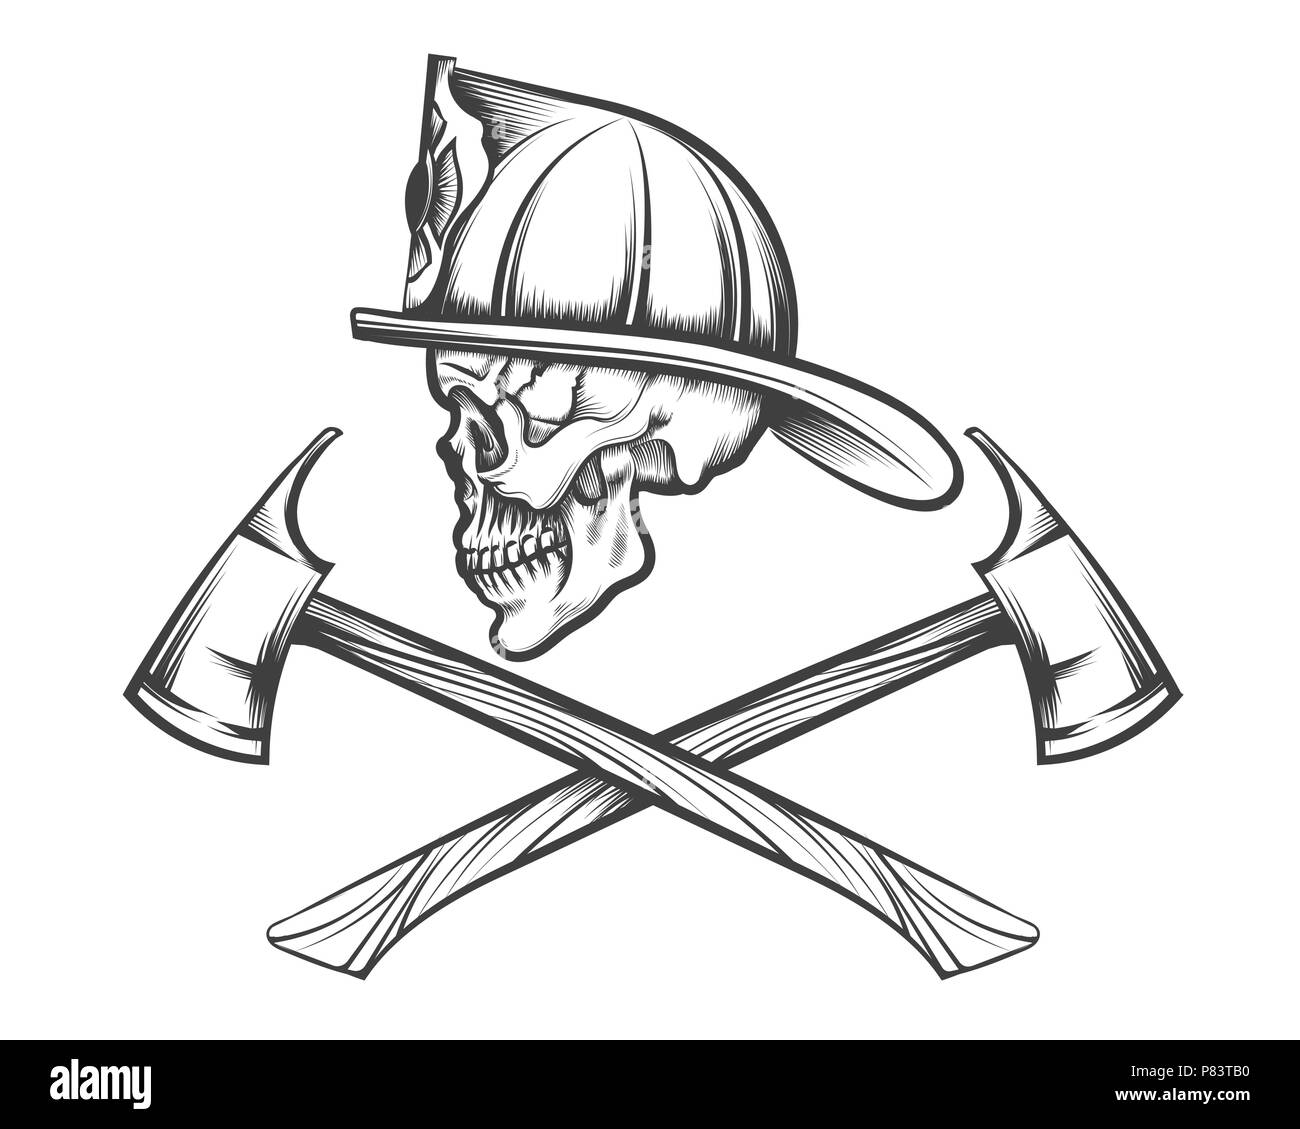 Firefighter skull in helmet and two crossed axes drawn in tattoo style. Vector illustration. Stock Vector